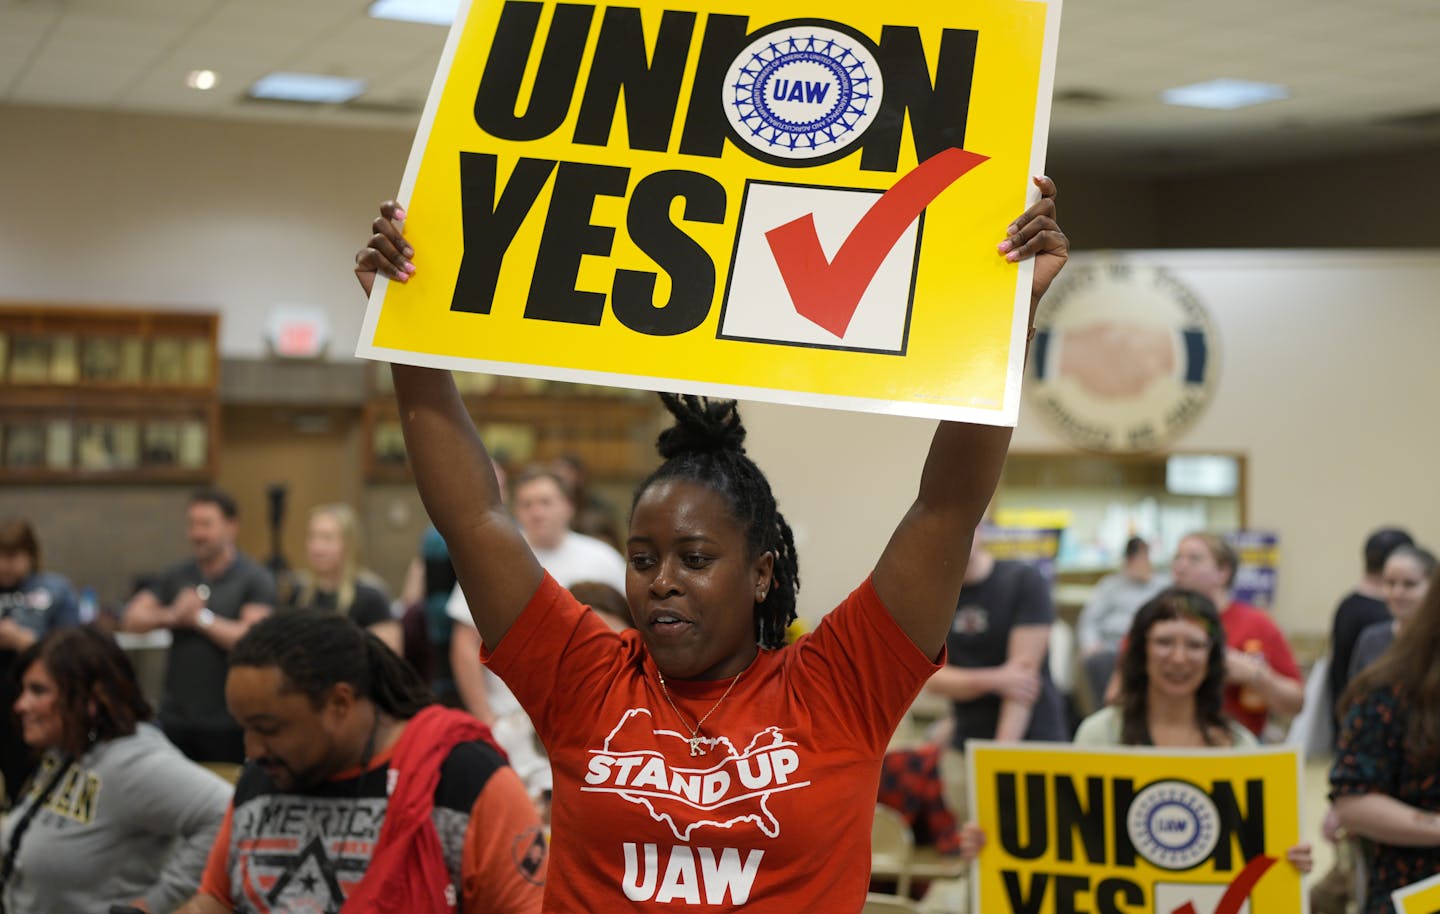 A woman in a red t-shirt saying 'stand up UAW' holds a yellow sign aloft that says 'UnionYes' with a checkmark.